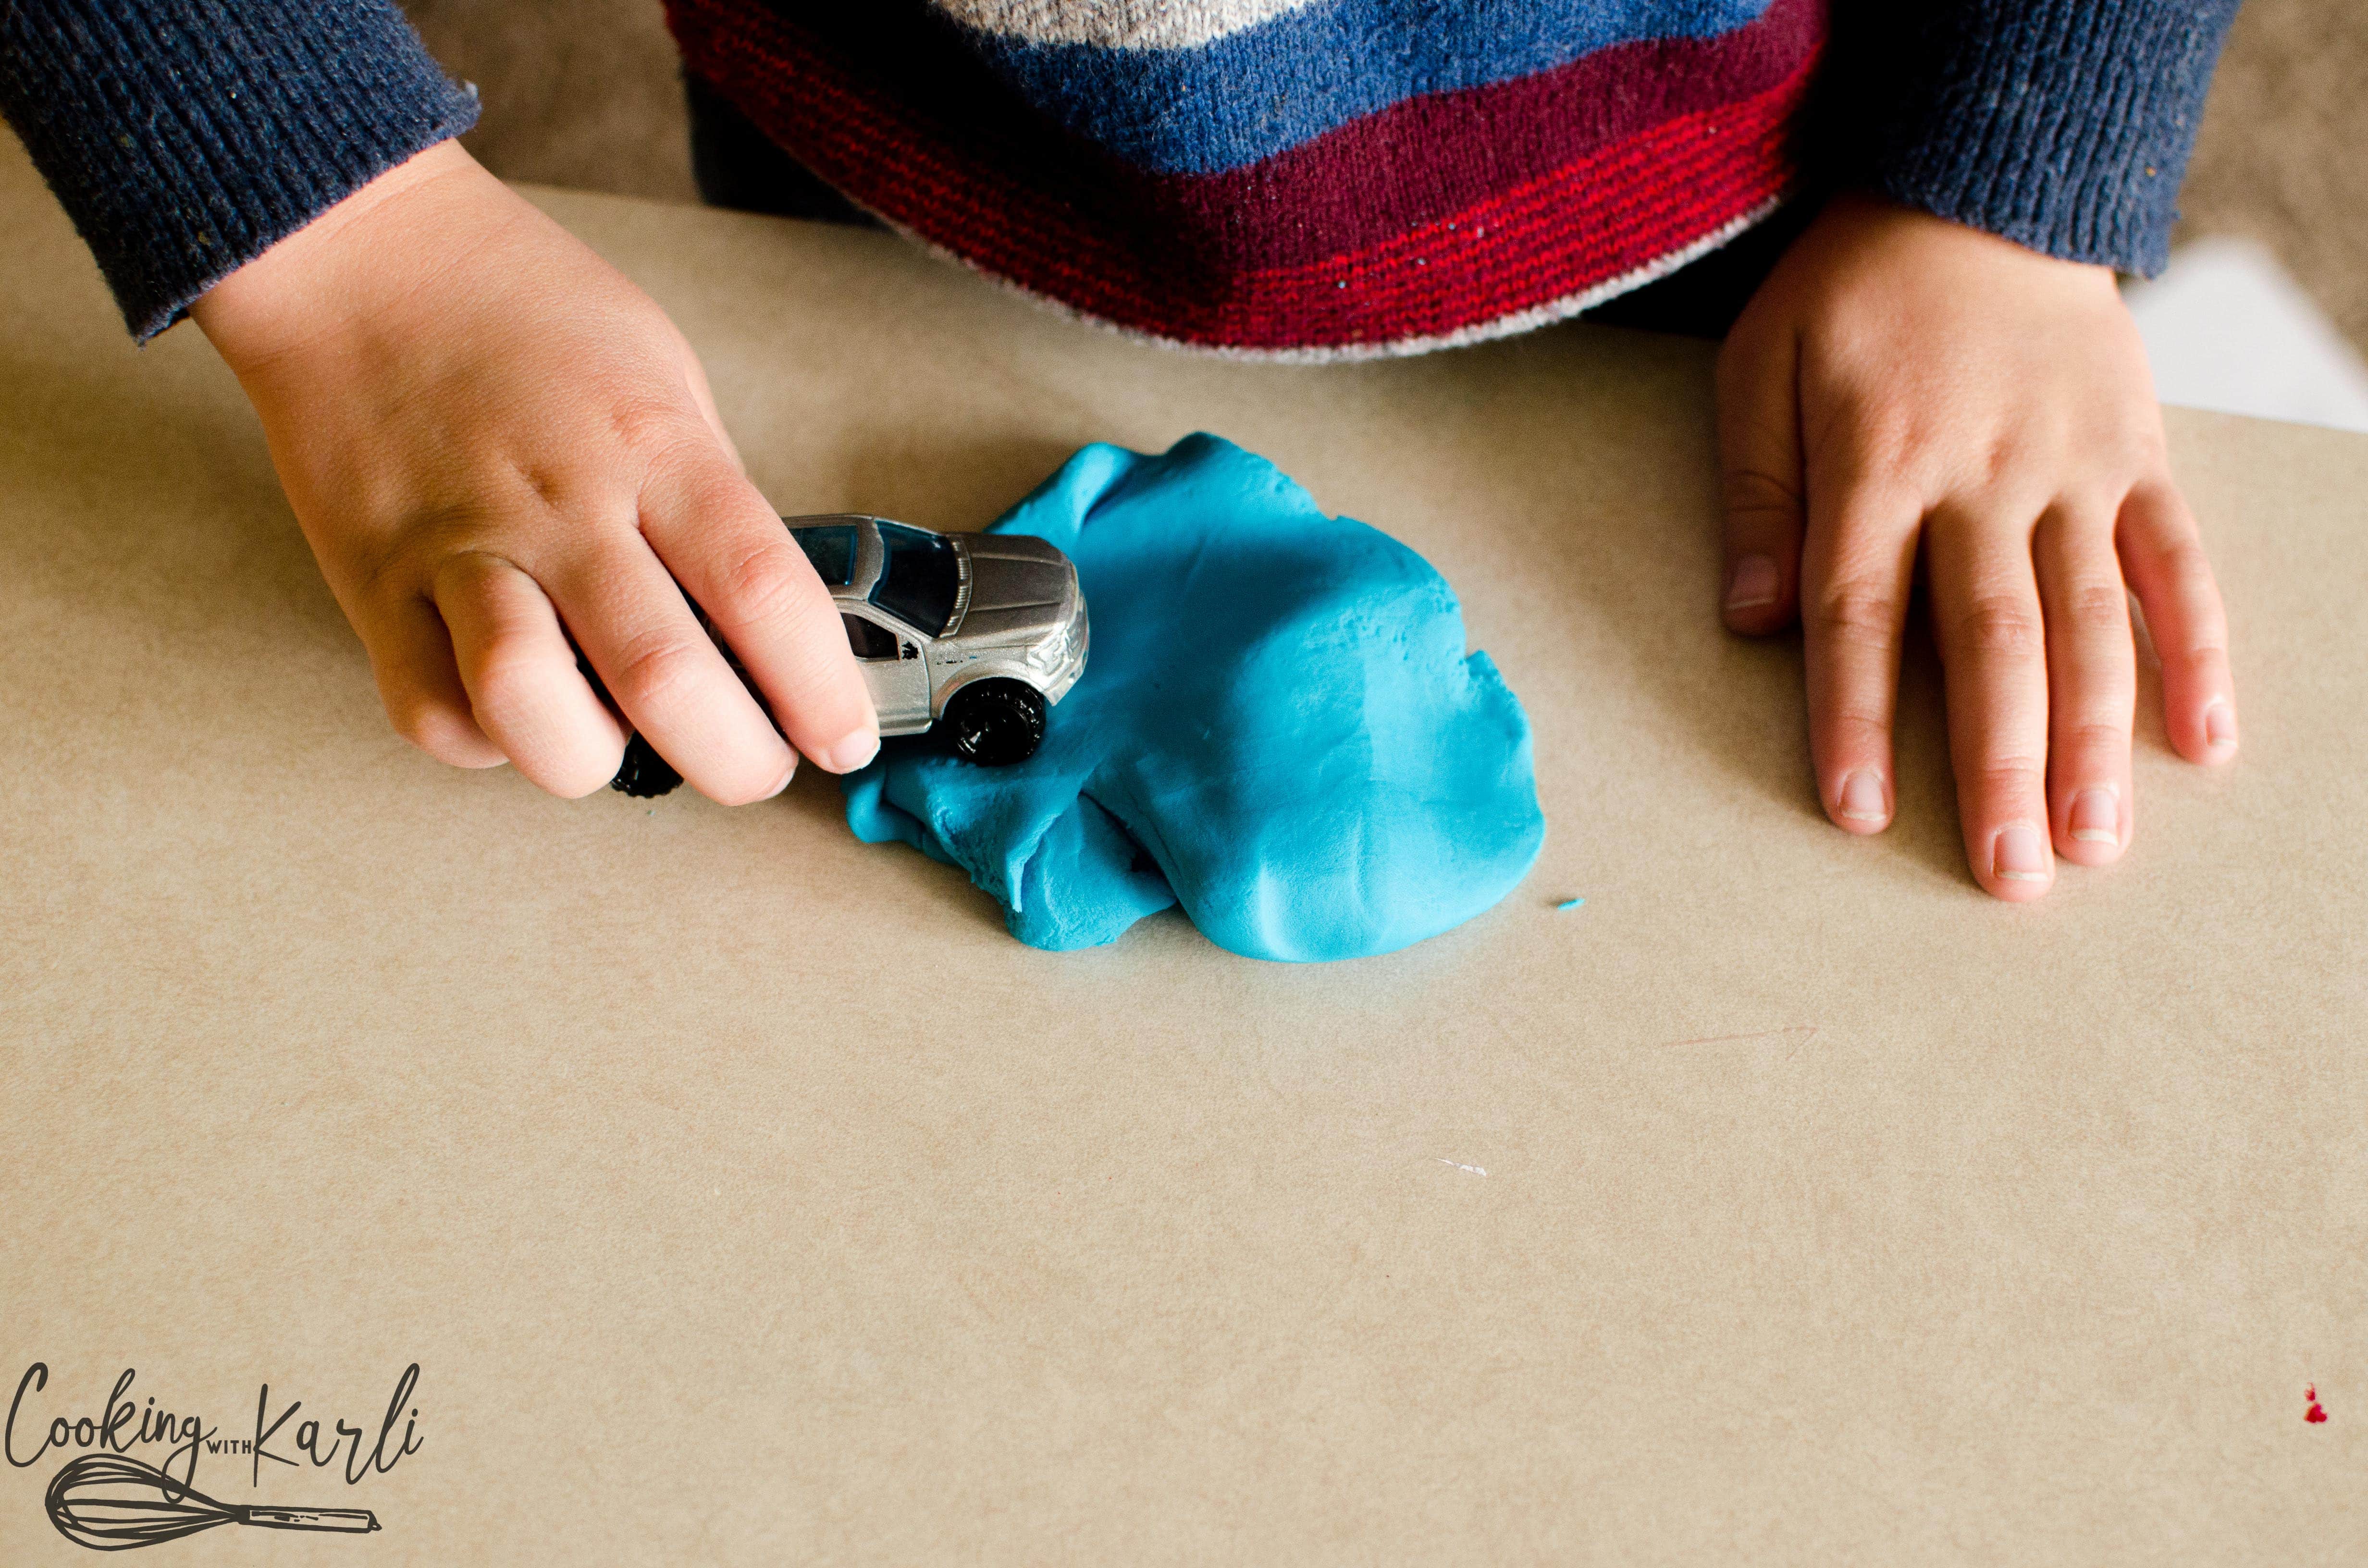 Take playing with PlayDoh to a whole new level with race cars!